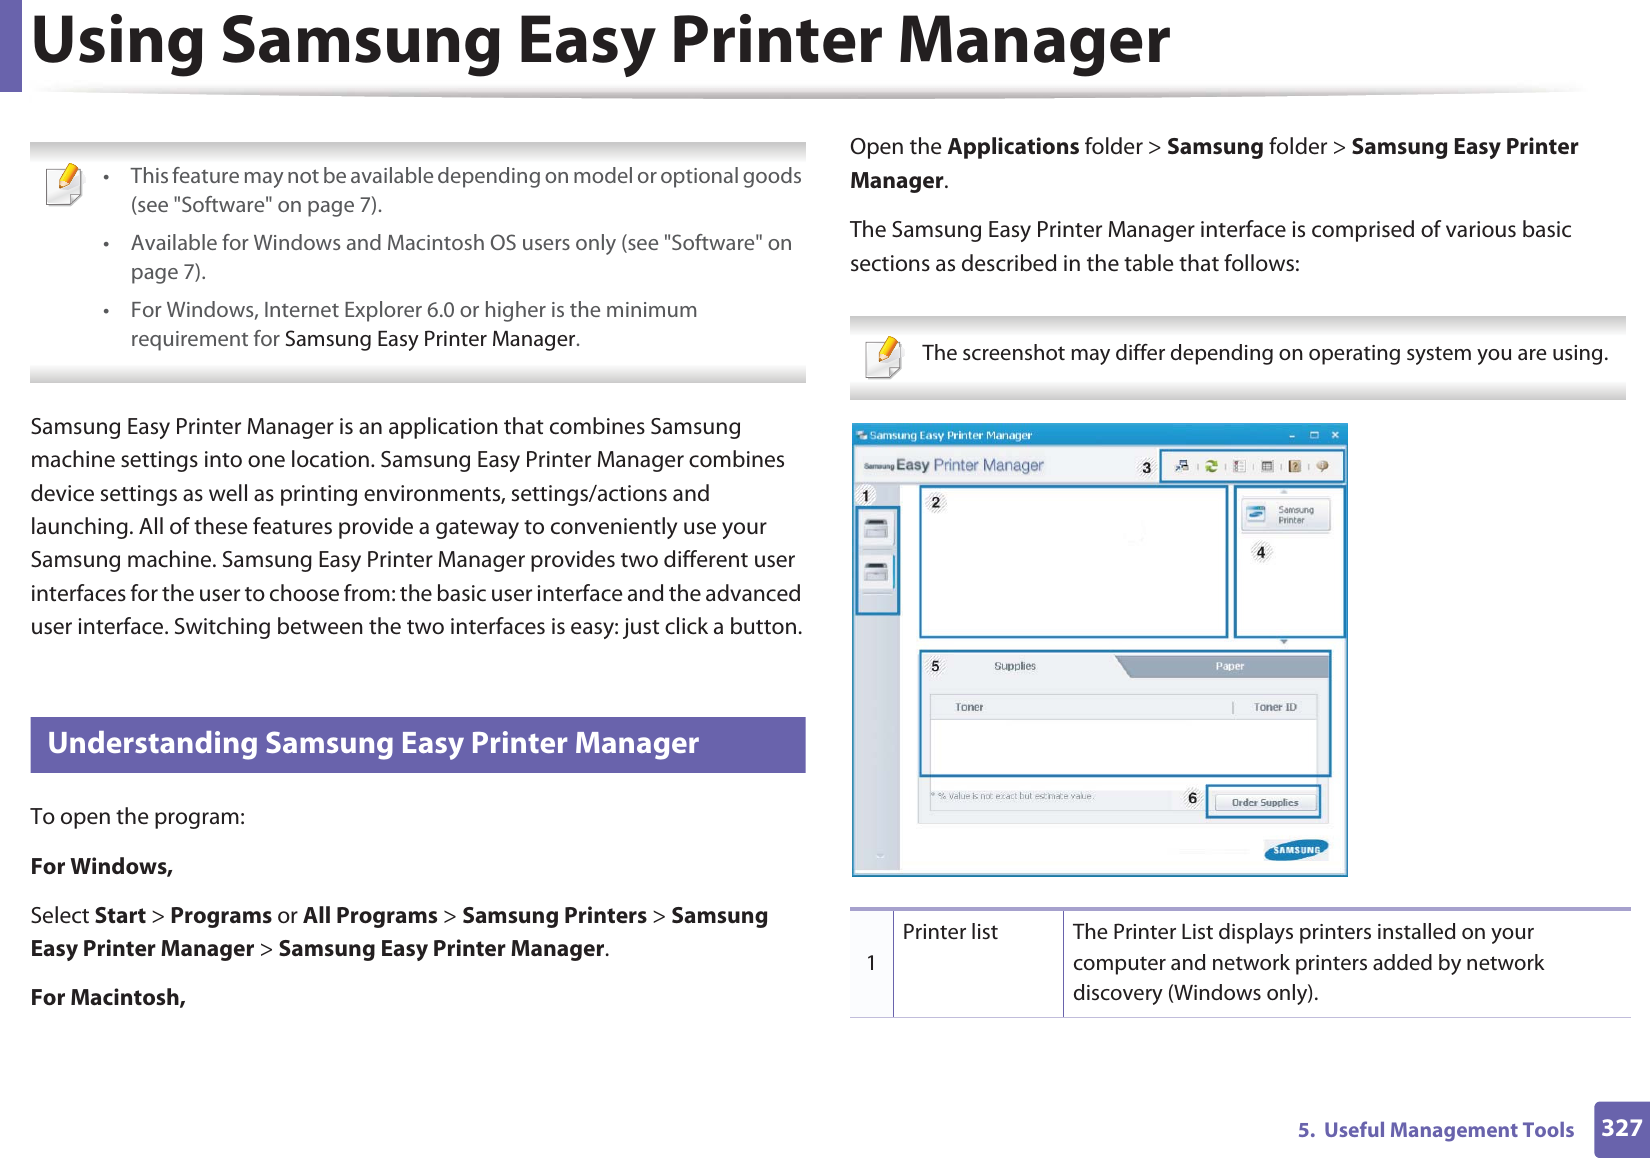 3275.  Useful Management ToolsUsing Samsung Easy Printer Manager  • This feature may not be available depending on model or optional goods (see &quot;Software&quot; on page 7).• Available for Windows and Macintosh OS users only (see &quot;Software&quot; on page 7).• For Windows, Internet Explorer 6.0 or higher is the minimum requirement for Samsung Easy Printer Manager. Samsung Easy Printer Manager is an application that combines Samsung machine settings into one location. Samsung Easy Printer Manager combines device settings as well as printing environments, settings/actions and launching. All of these features provide a gateway to conveniently use your Samsung machine. Samsung Easy Printer Manager provides two different user interfaces for the user to choose from: the basic user interface and the advanced user interface. Switching between the two interfaces is easy: just click a button.8 Understanding Samsung Easy Printer ManagerTo open the program: For Windows,Select Start &gt; Programs or All Programs &gt; Samsung Printers &gt; Samsung Easy Printer Manager &gt; Samsung Easy Printer Manager.For Macintosh,Open the Applications folder &gt; Samsung folder &gt; Samsung Easy Printer Manager.The Samsung Easy Printer Manager interface is comprised of various basic sections as described in the table that follows: The screenshot may differ depending on operating system you are using. 1Printer list The Printer List displays printers installed on your computer and network printers added by network discovery (Windows only).